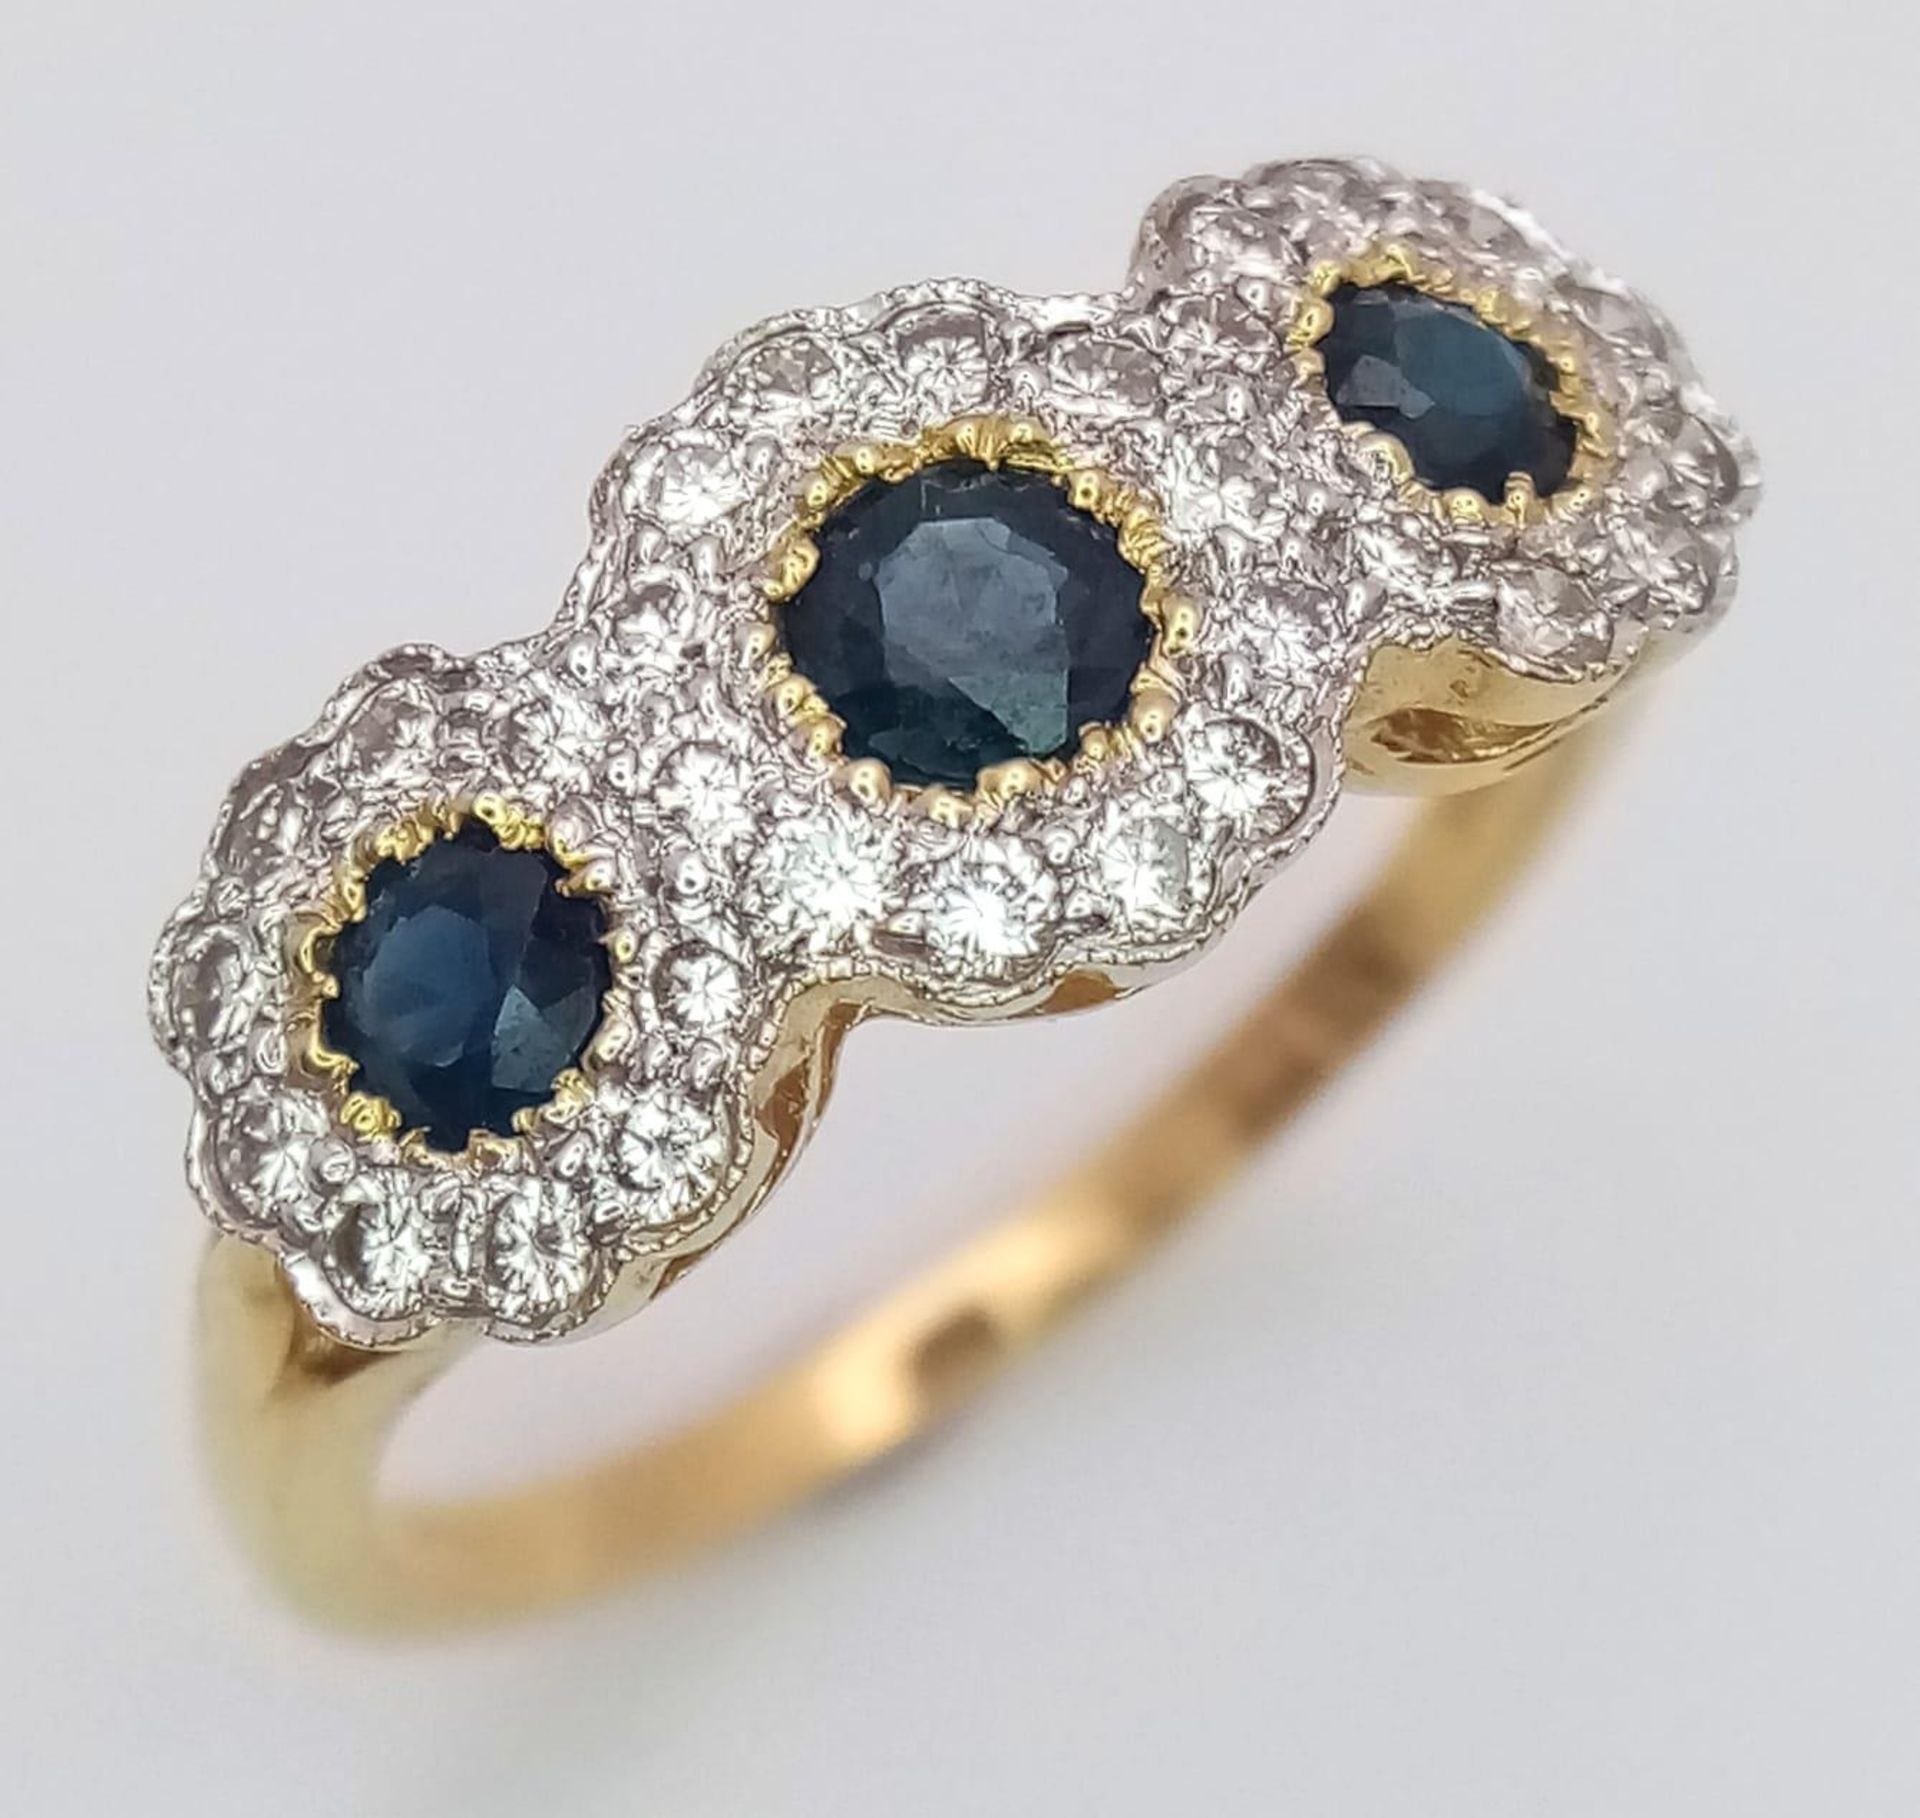 A 18K YELLOW GOLD DIAMOND & SAPPHIRE TRIPLE CLUSTER RING, APPROX 0.35CT DIAMONDS, WEIGHT 3.2G SIZE O - Image 2 of 4